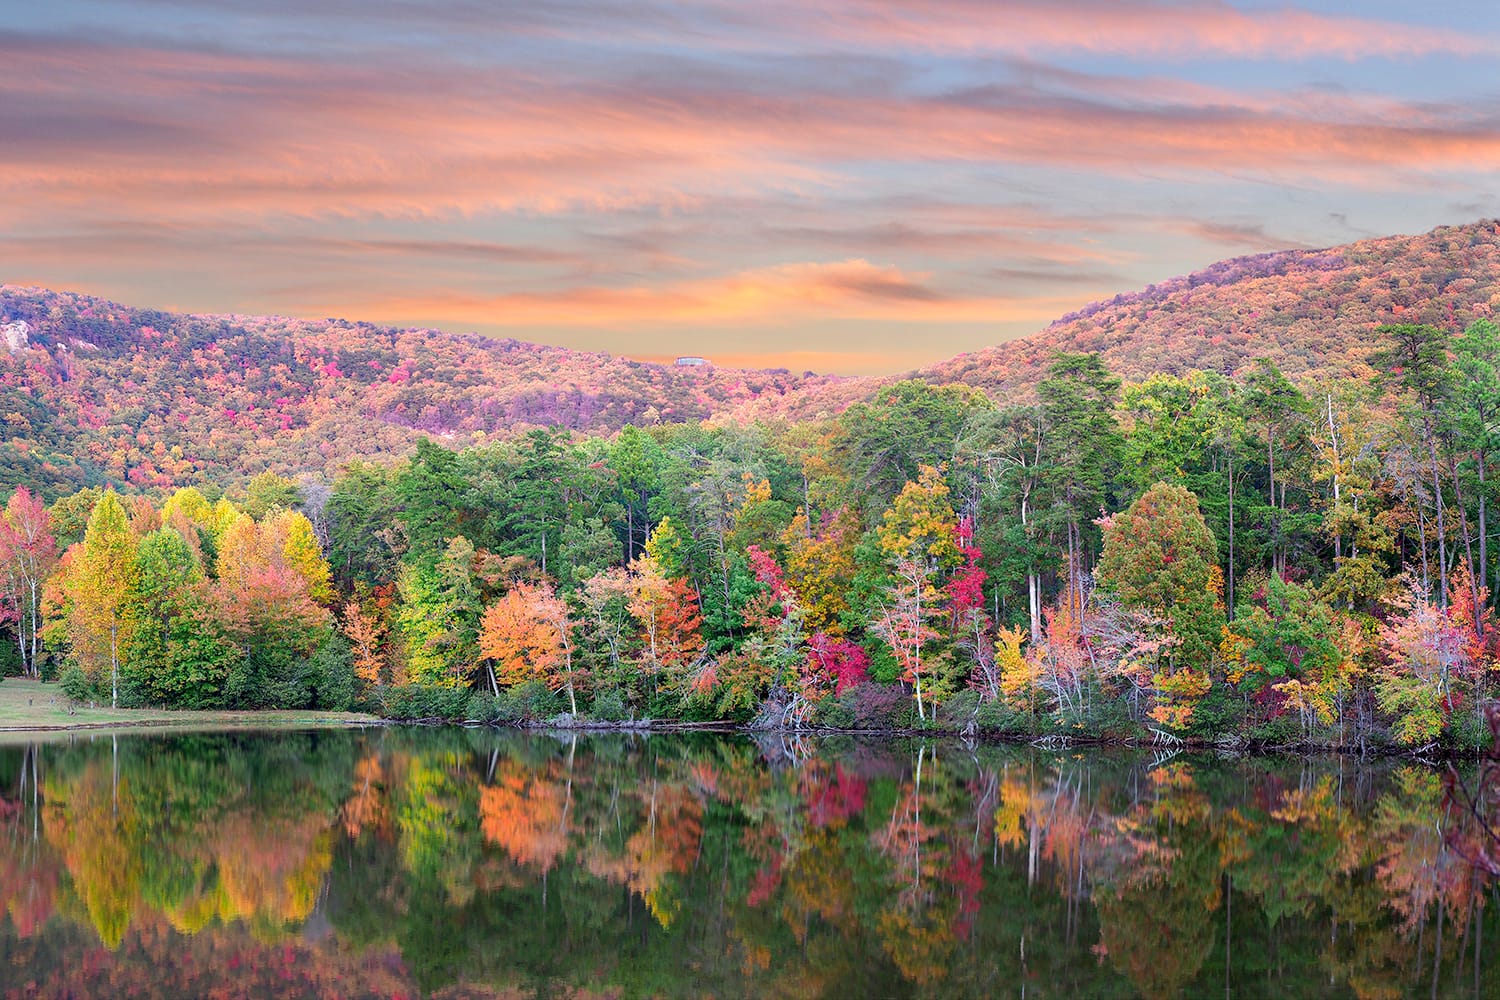 Panorama of the Beautiful Fall Foliage Reflected in the Lake at Cheaha State Park, Alabama